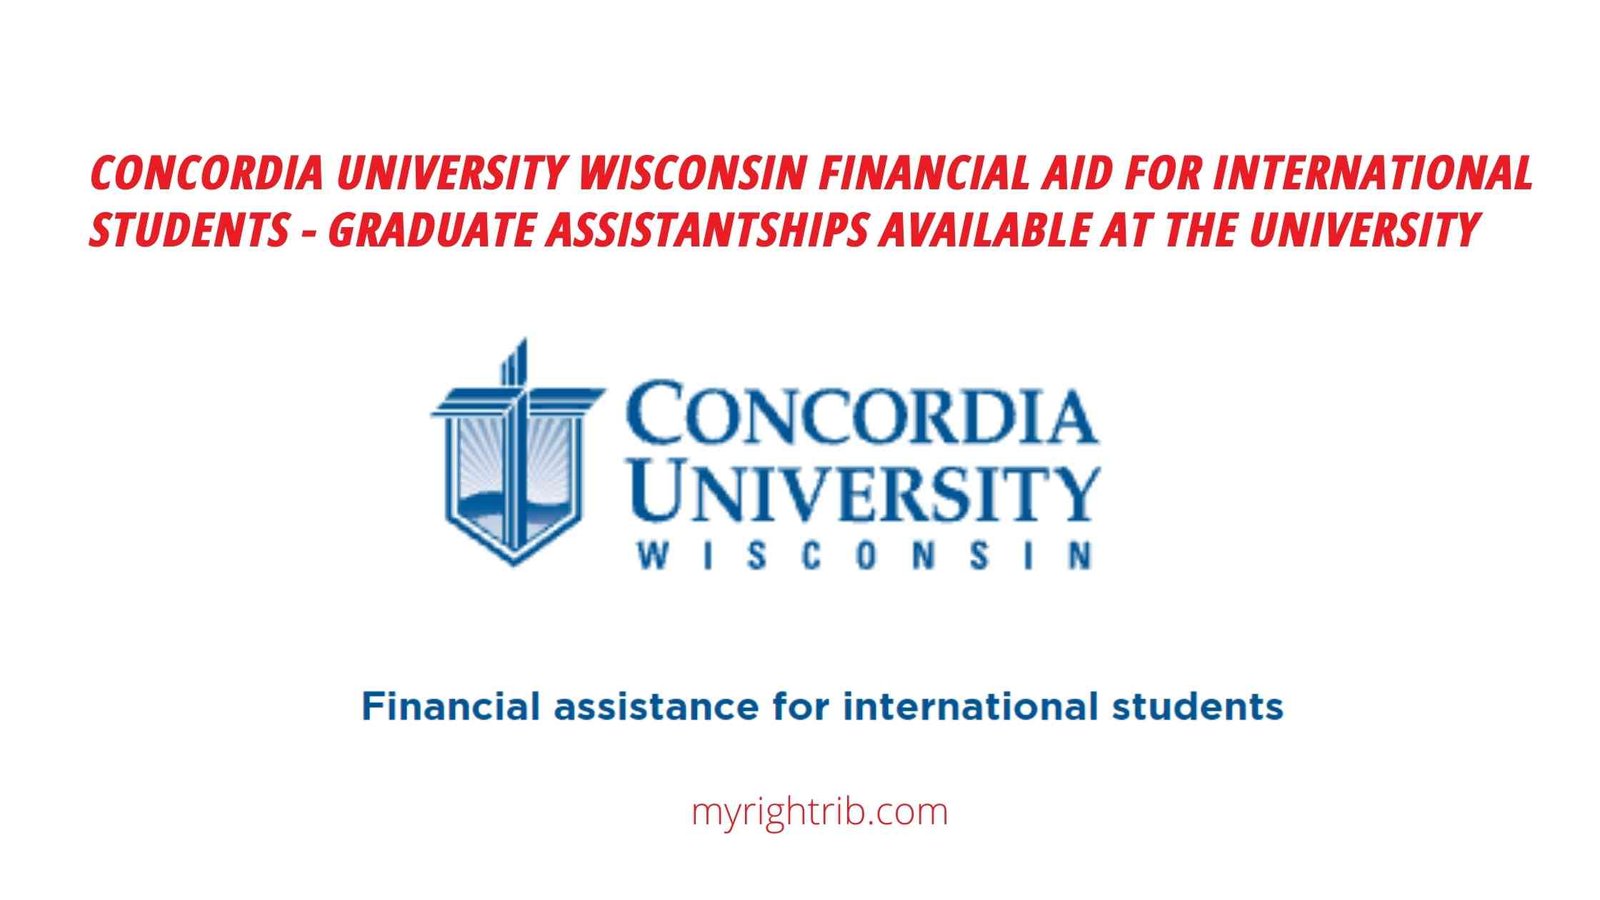 Concordia University Wisconsin Financial Aid for International Students